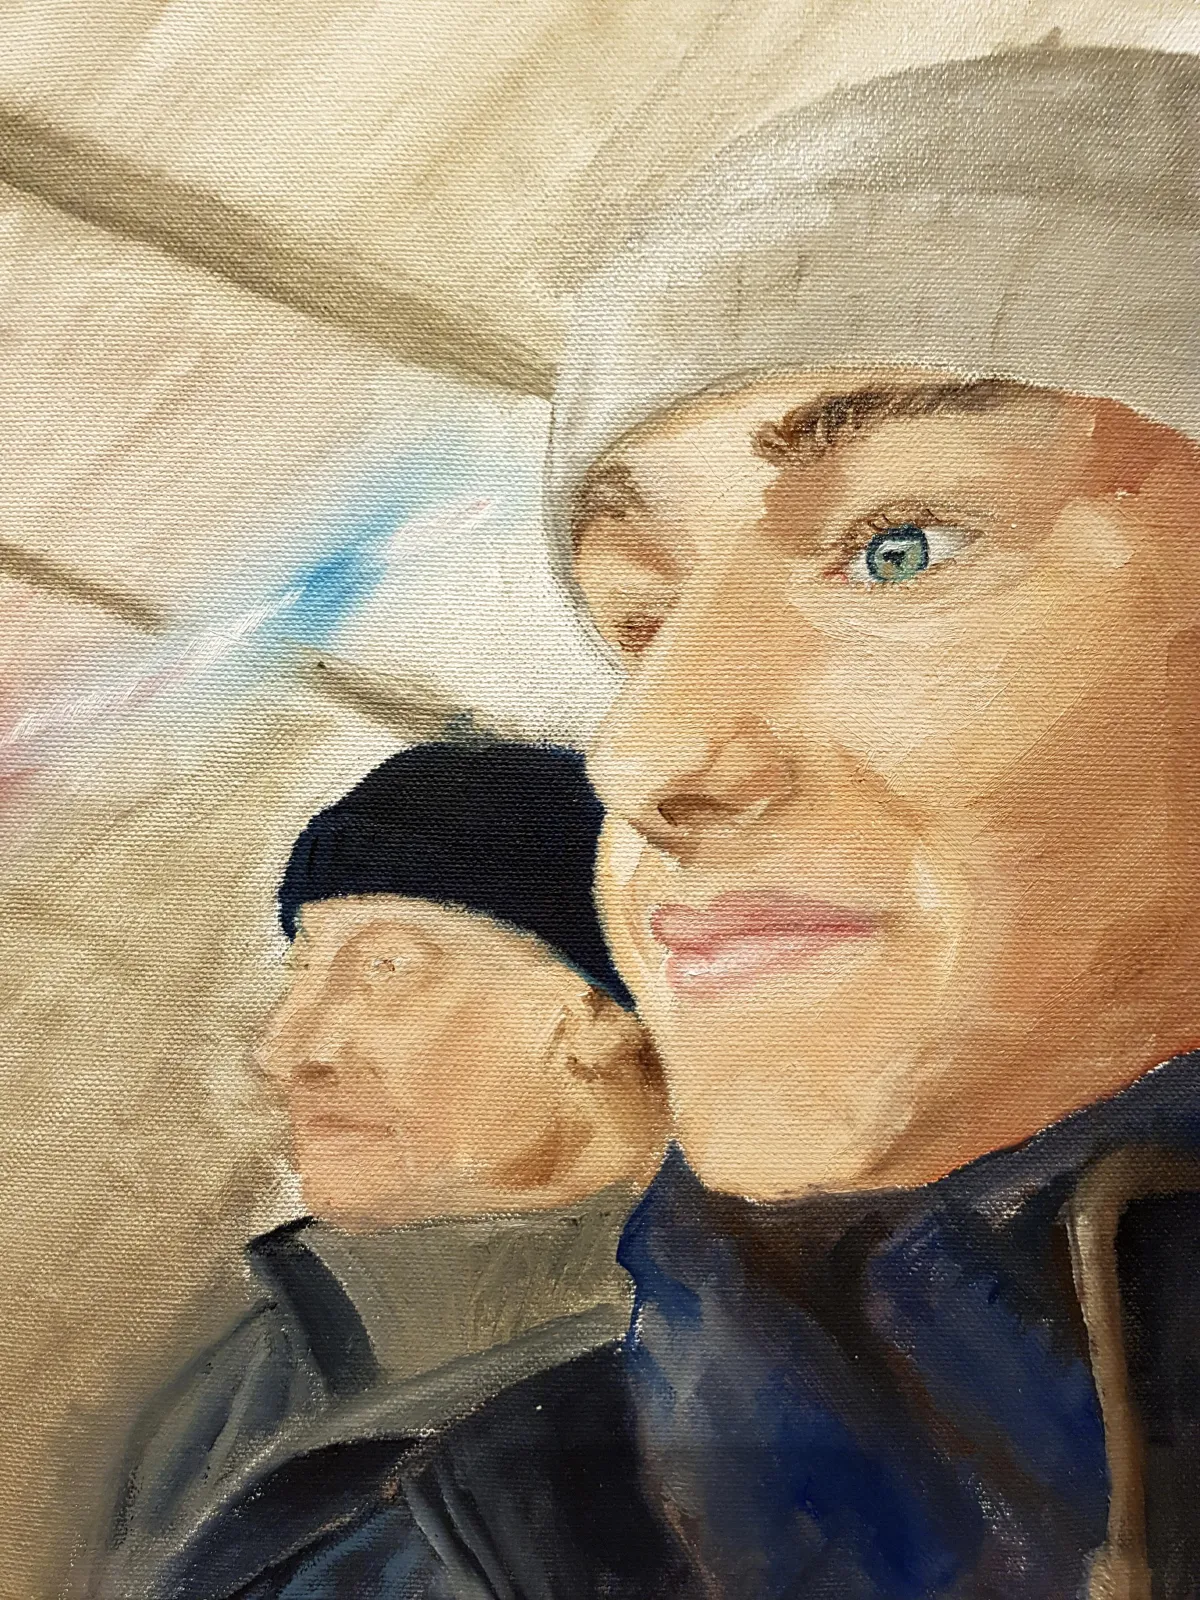 A portrait painting of two spectators watching a rugby match